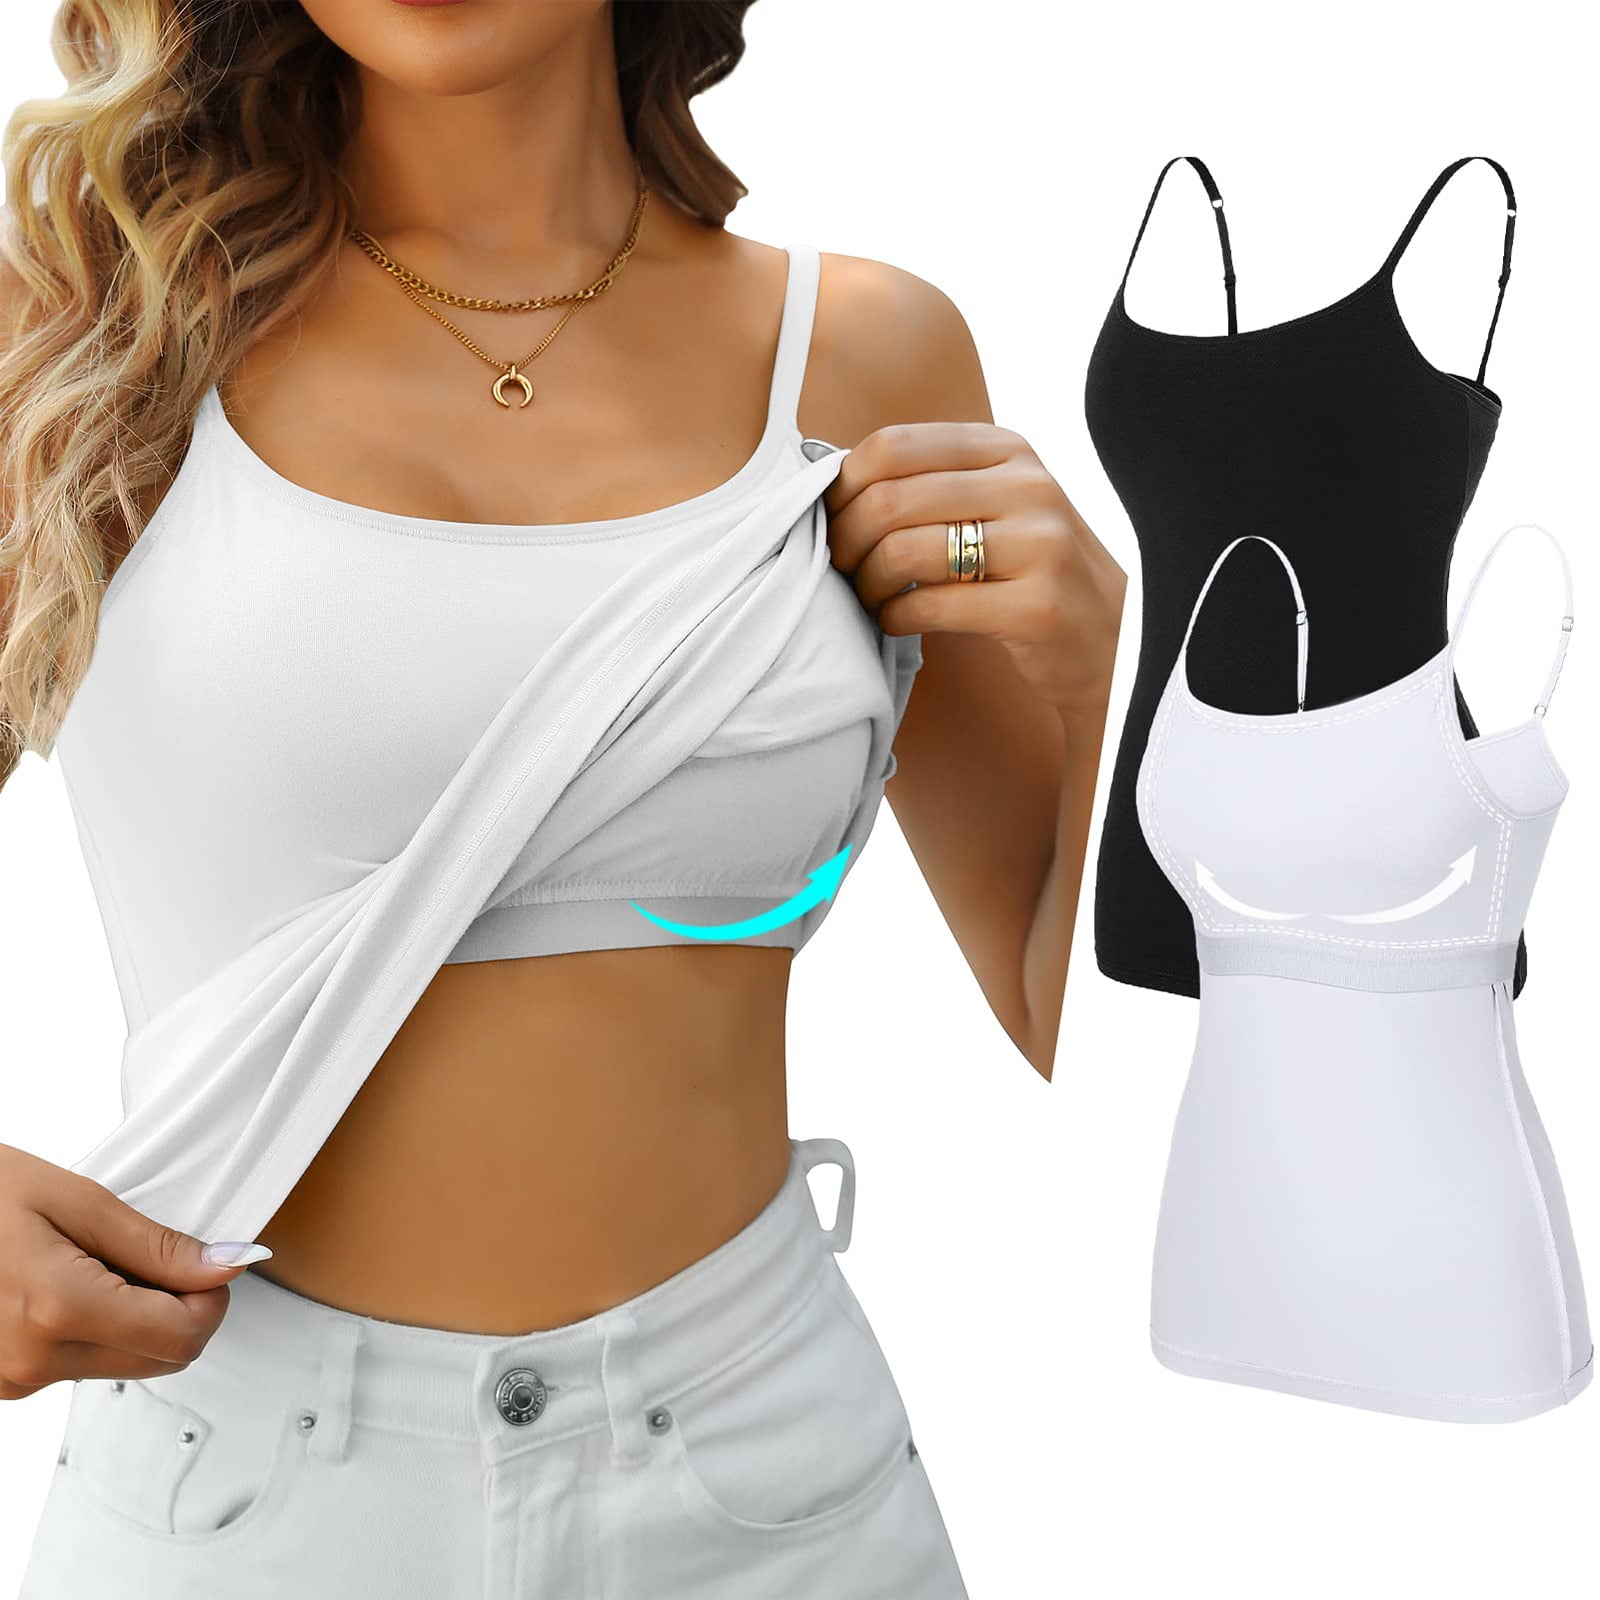 NEW COTTON SPANDEX CROP TOP CAMI CAMISOLE CROPPED TANK TOP S M L